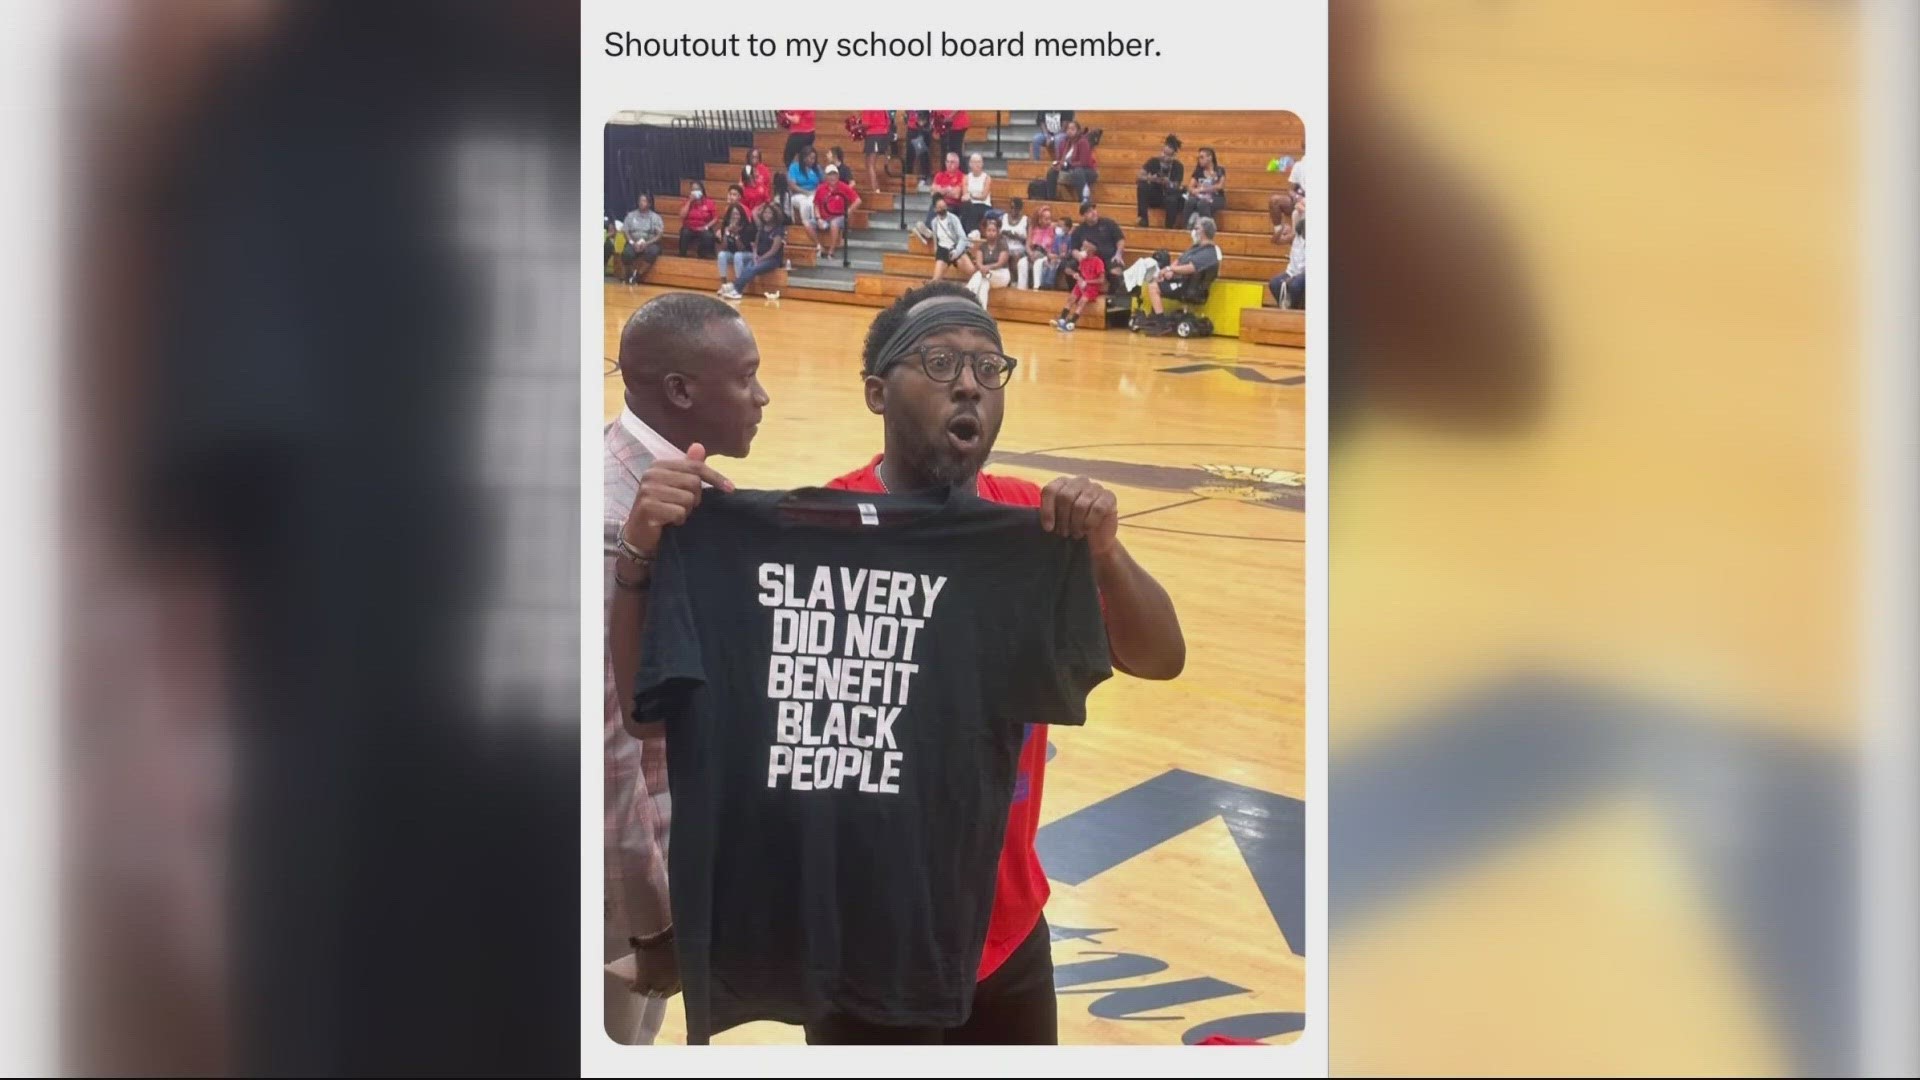 Darryl Willie told First Coast News he made the shirt himself in his garage this weekend, but he didn’t expect it to get so much attention.